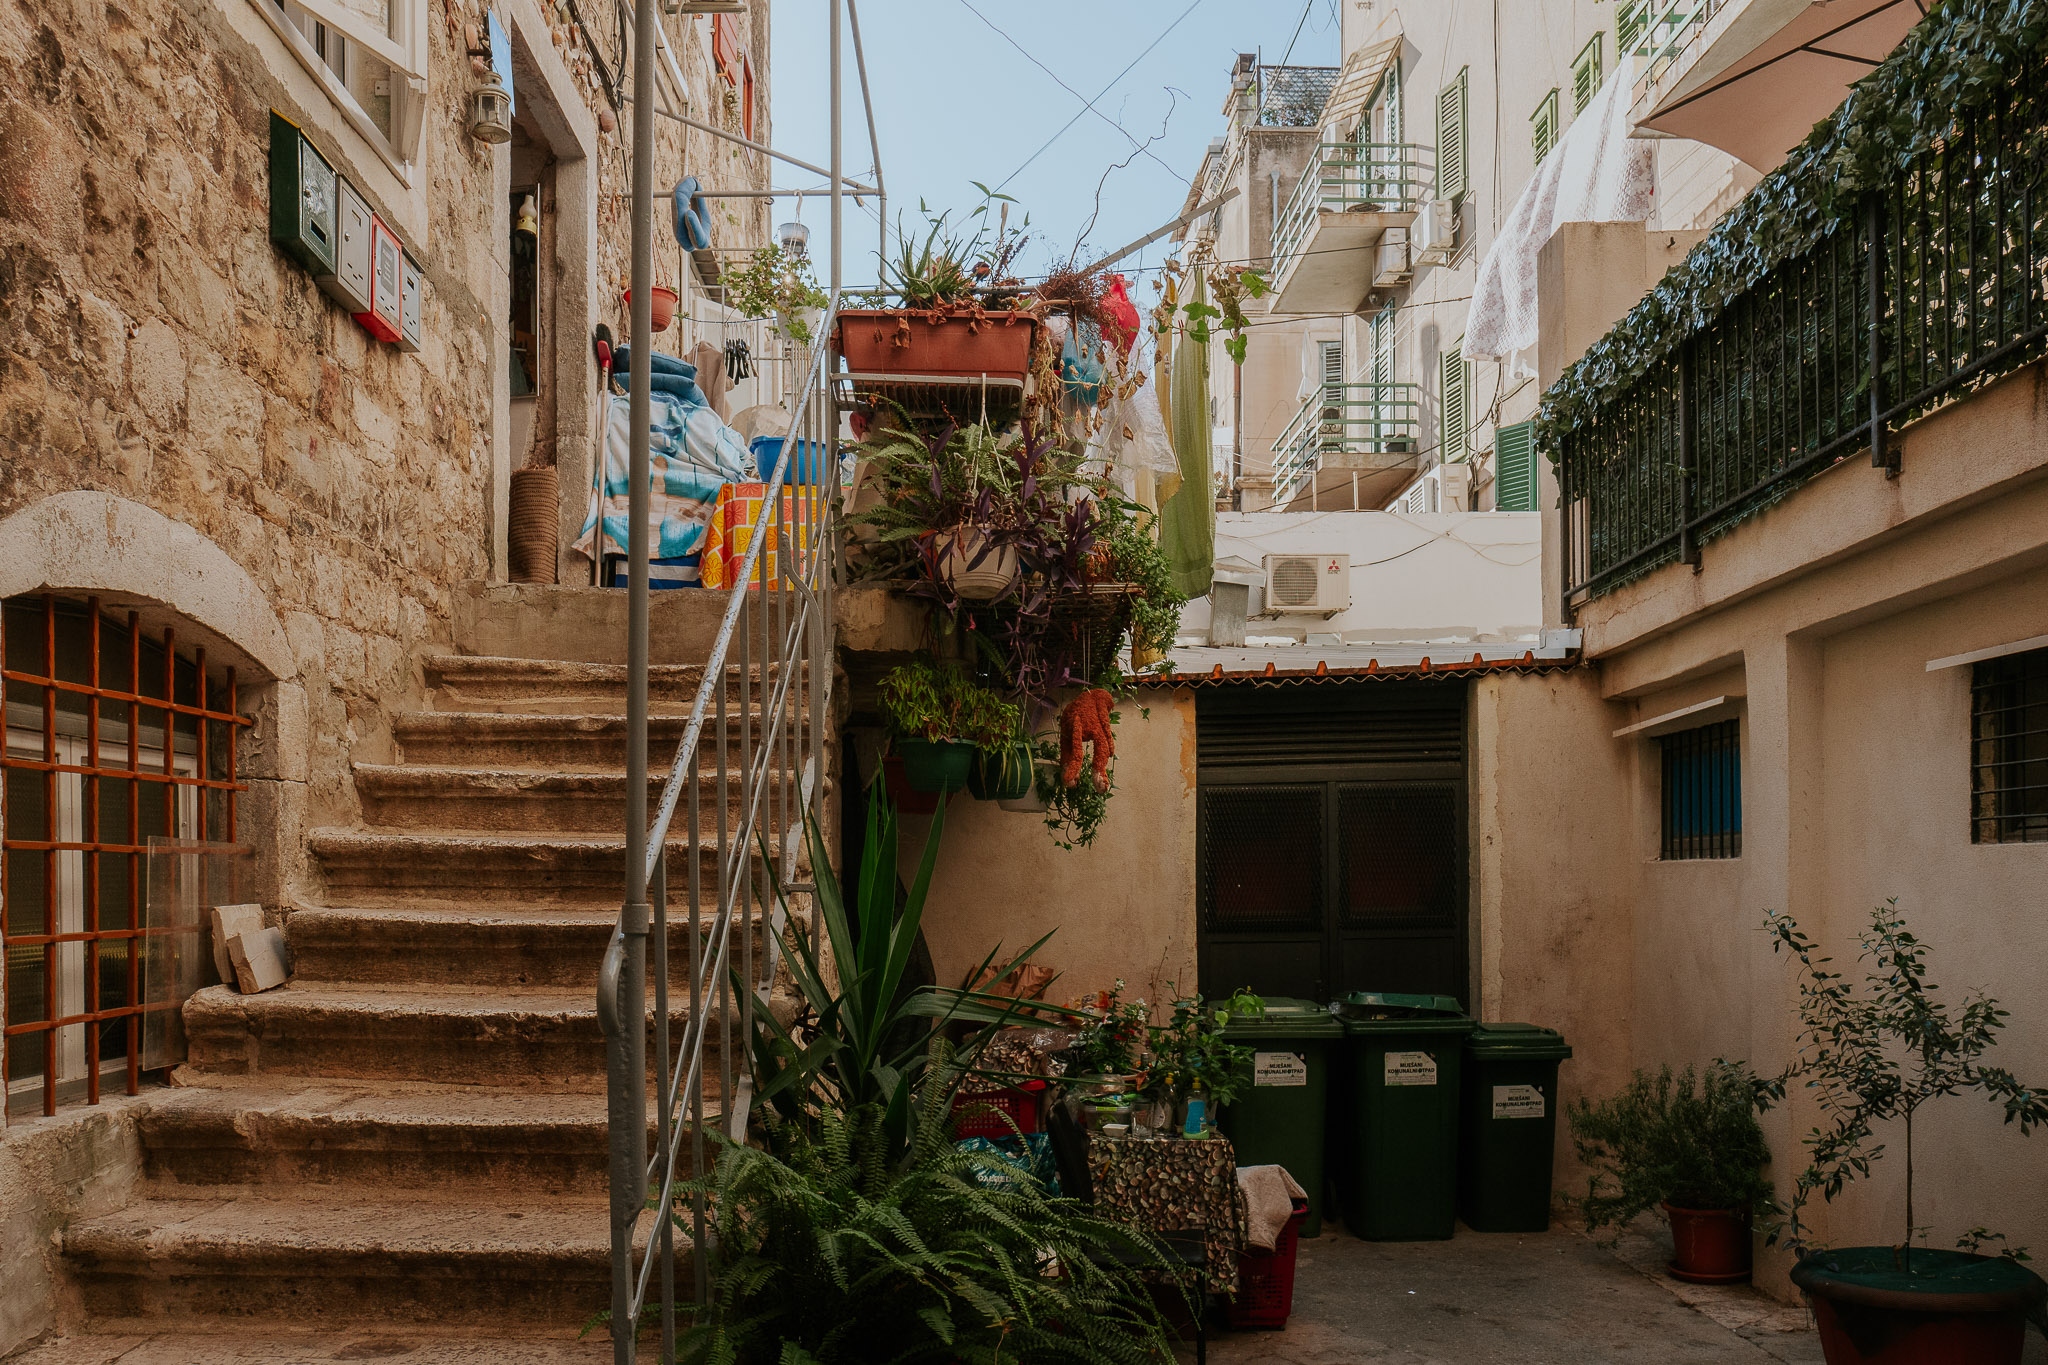 The backs of old houses in Split, Croatia. There are stairs on the left and a courtyard on the right. In the courtyard are plants and green bins. There are lots of balconies above with green railings.